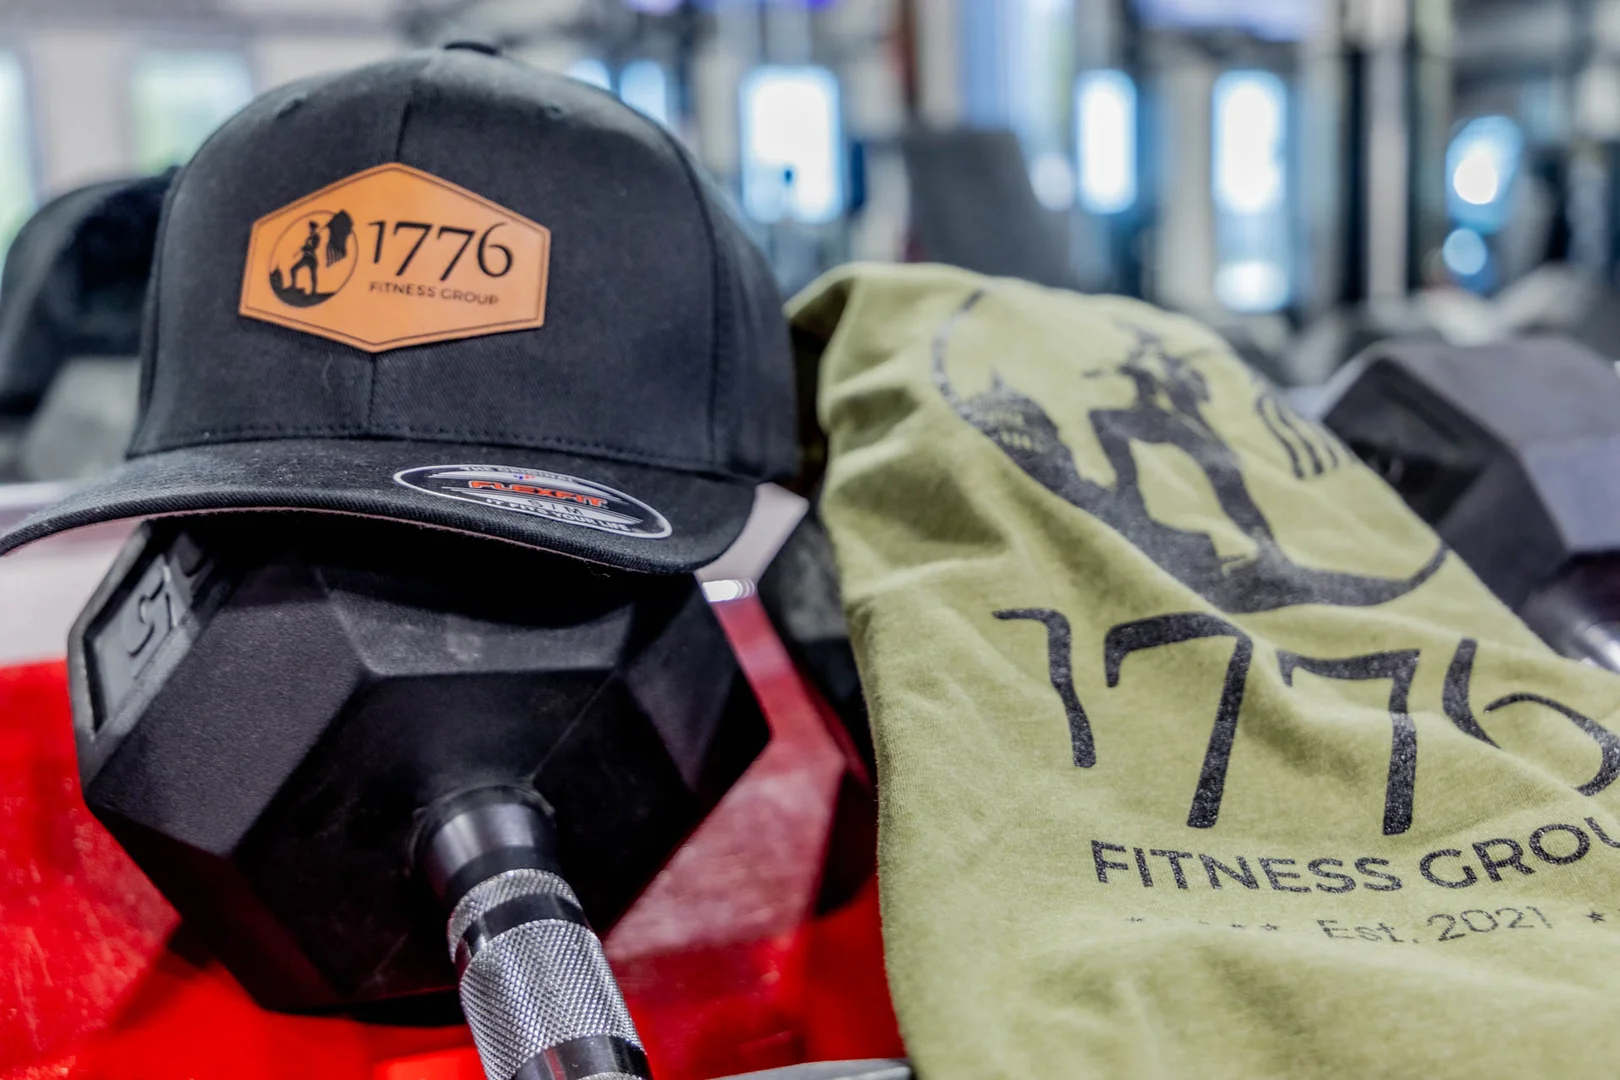 1776 Fitness Group hat and shirt